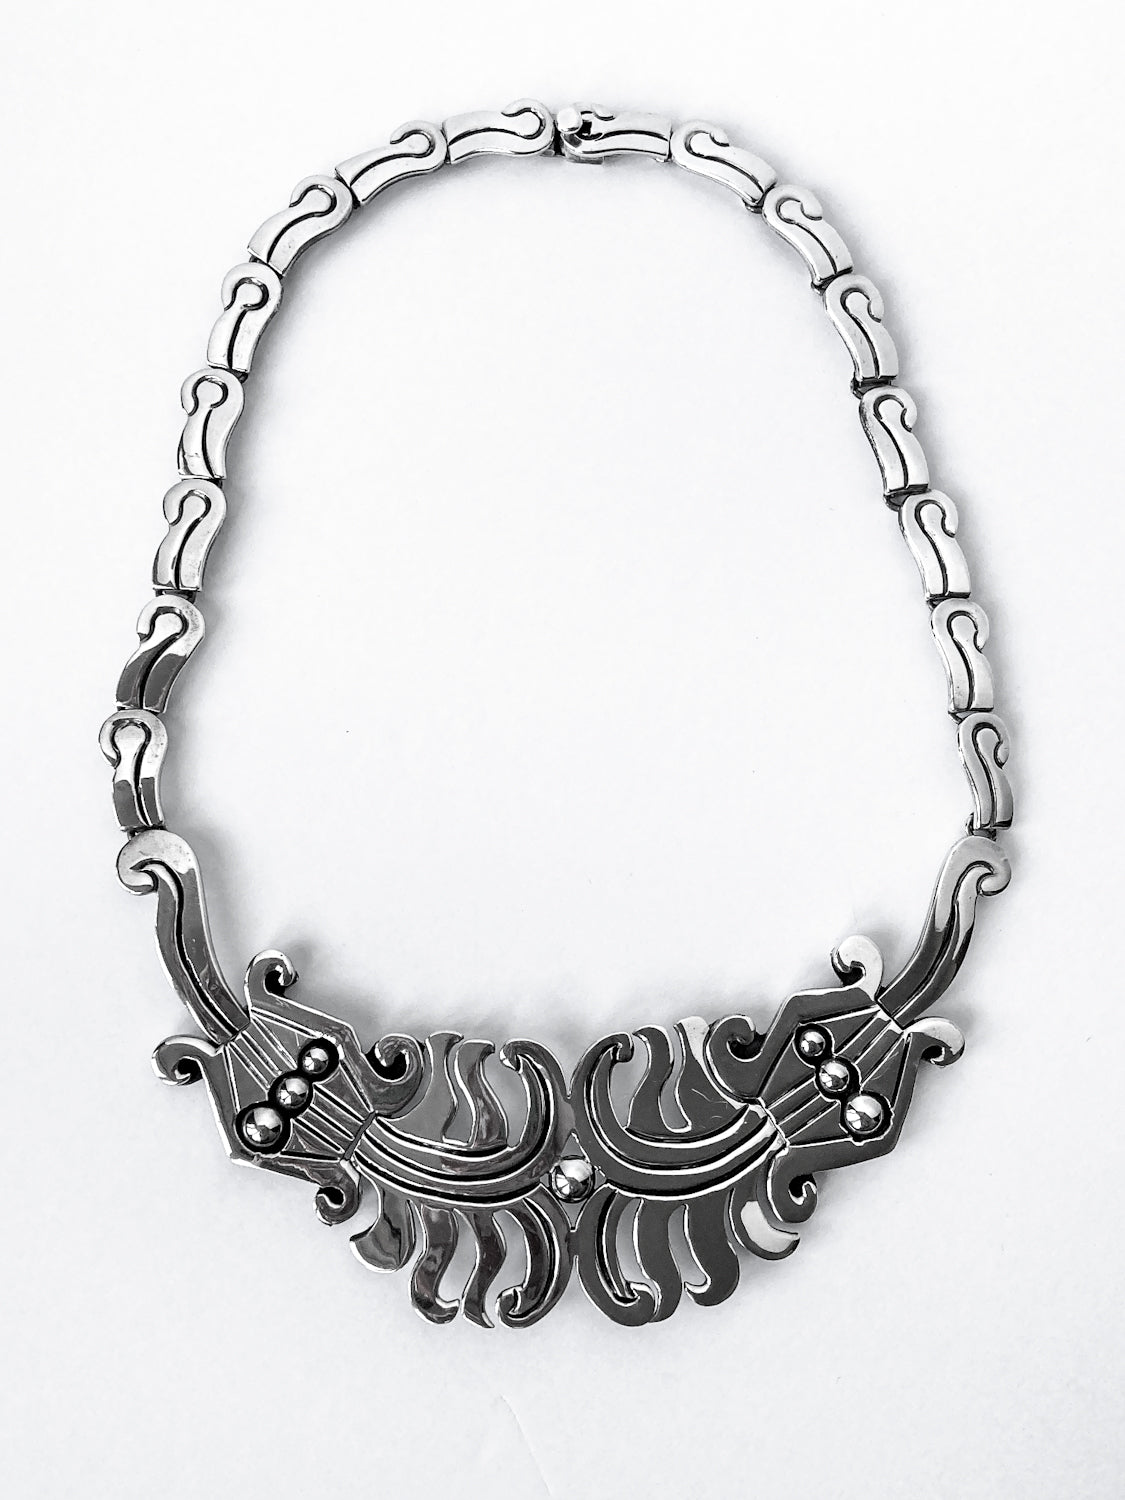 Vintage 1940's Mexico Sterling Silver Incised Hector Aguilar Statement Necklace